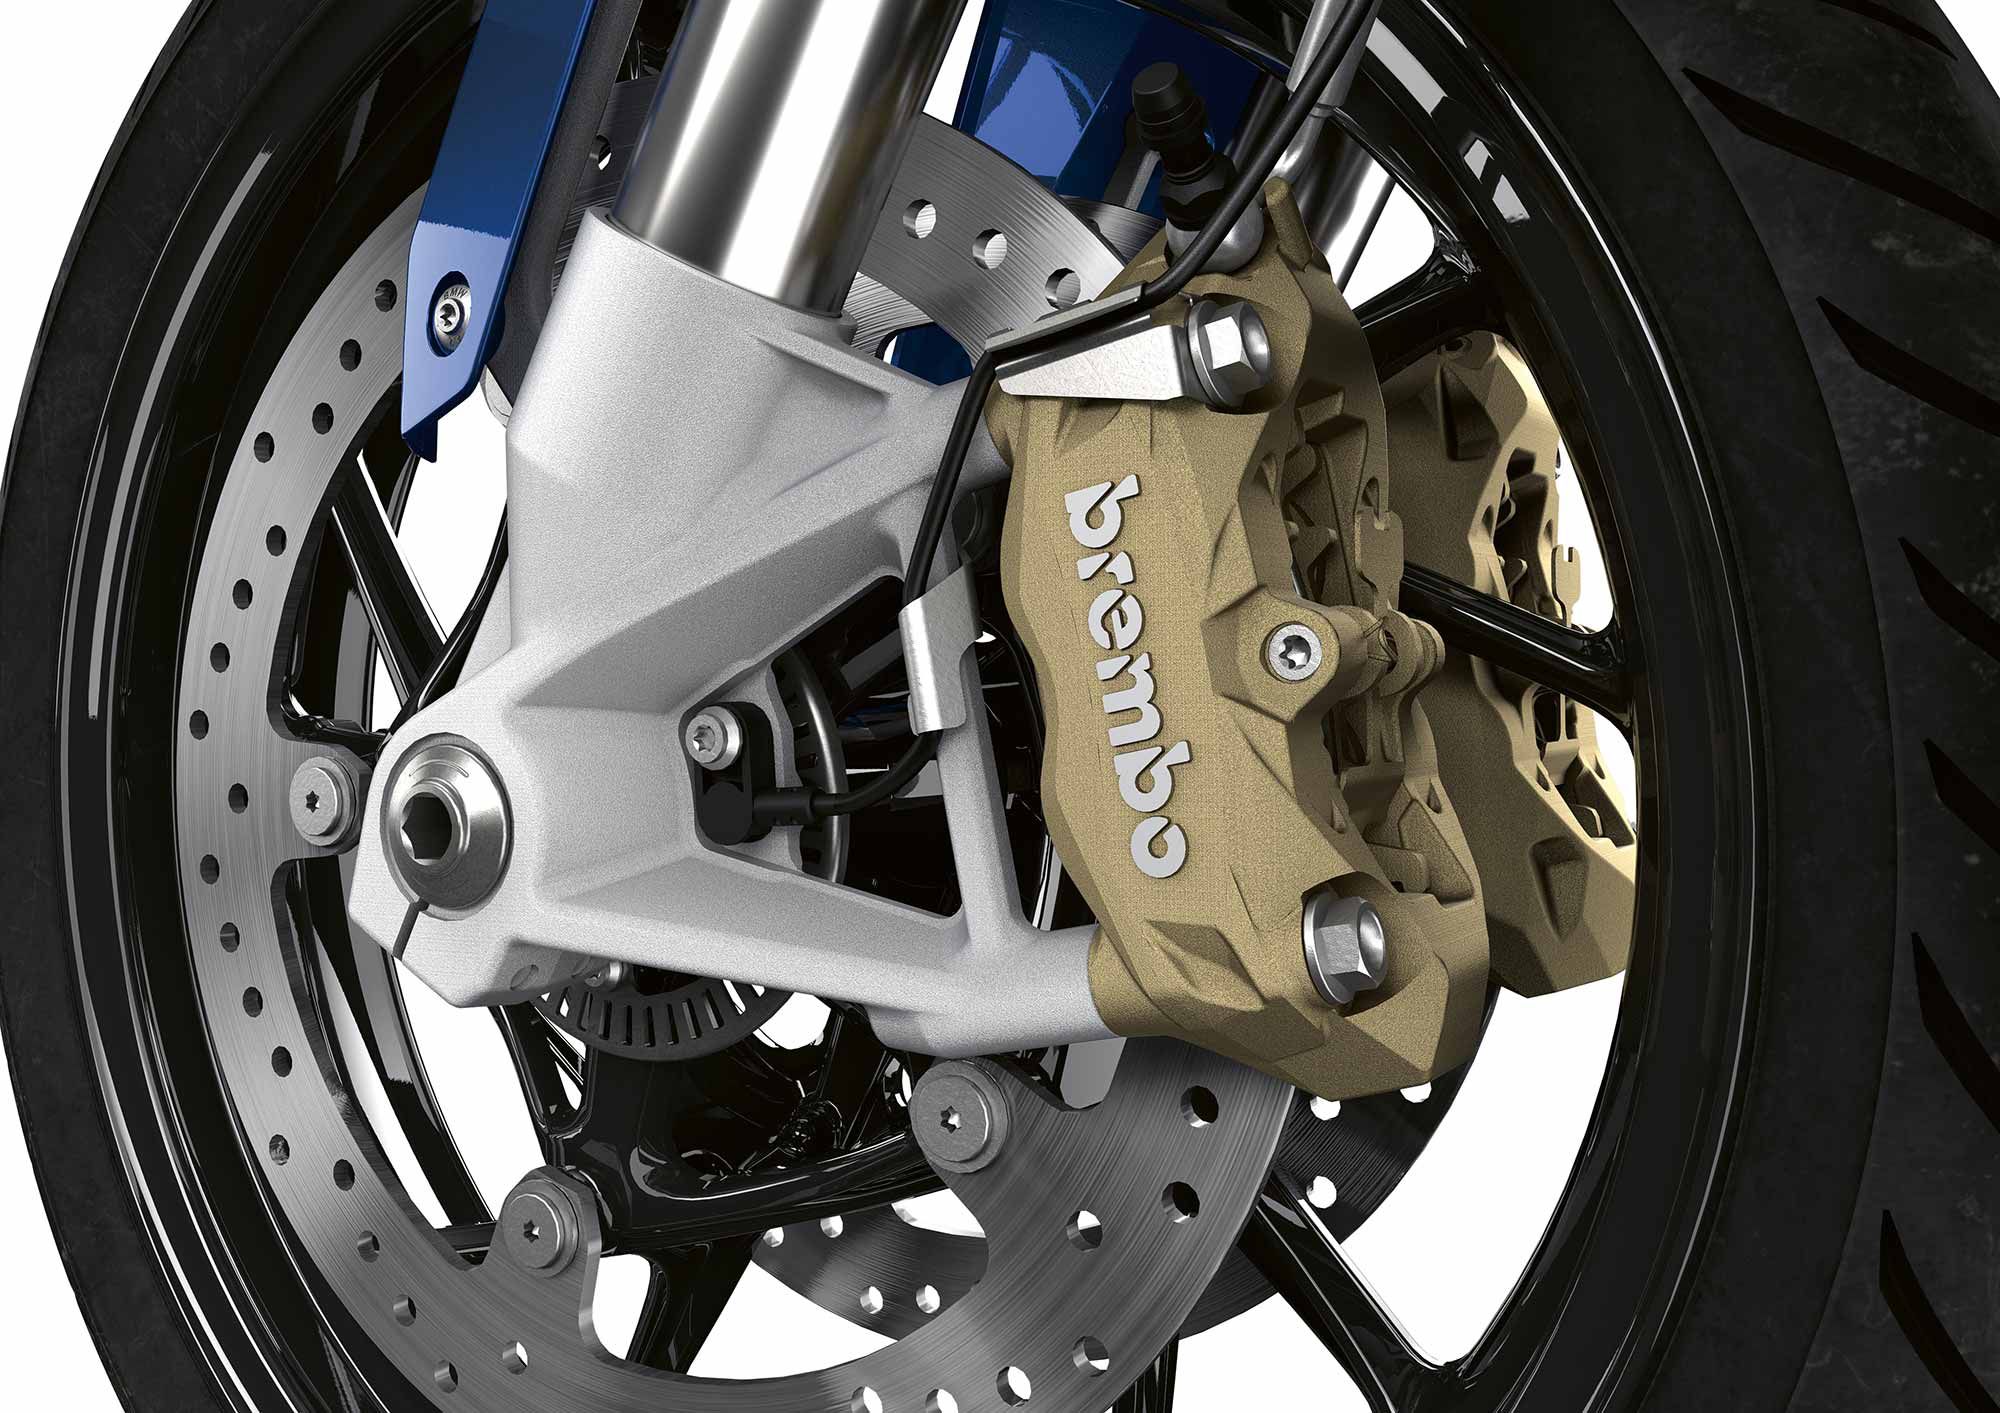 Brembo four-piston calipers grip 320mm discs at the front.